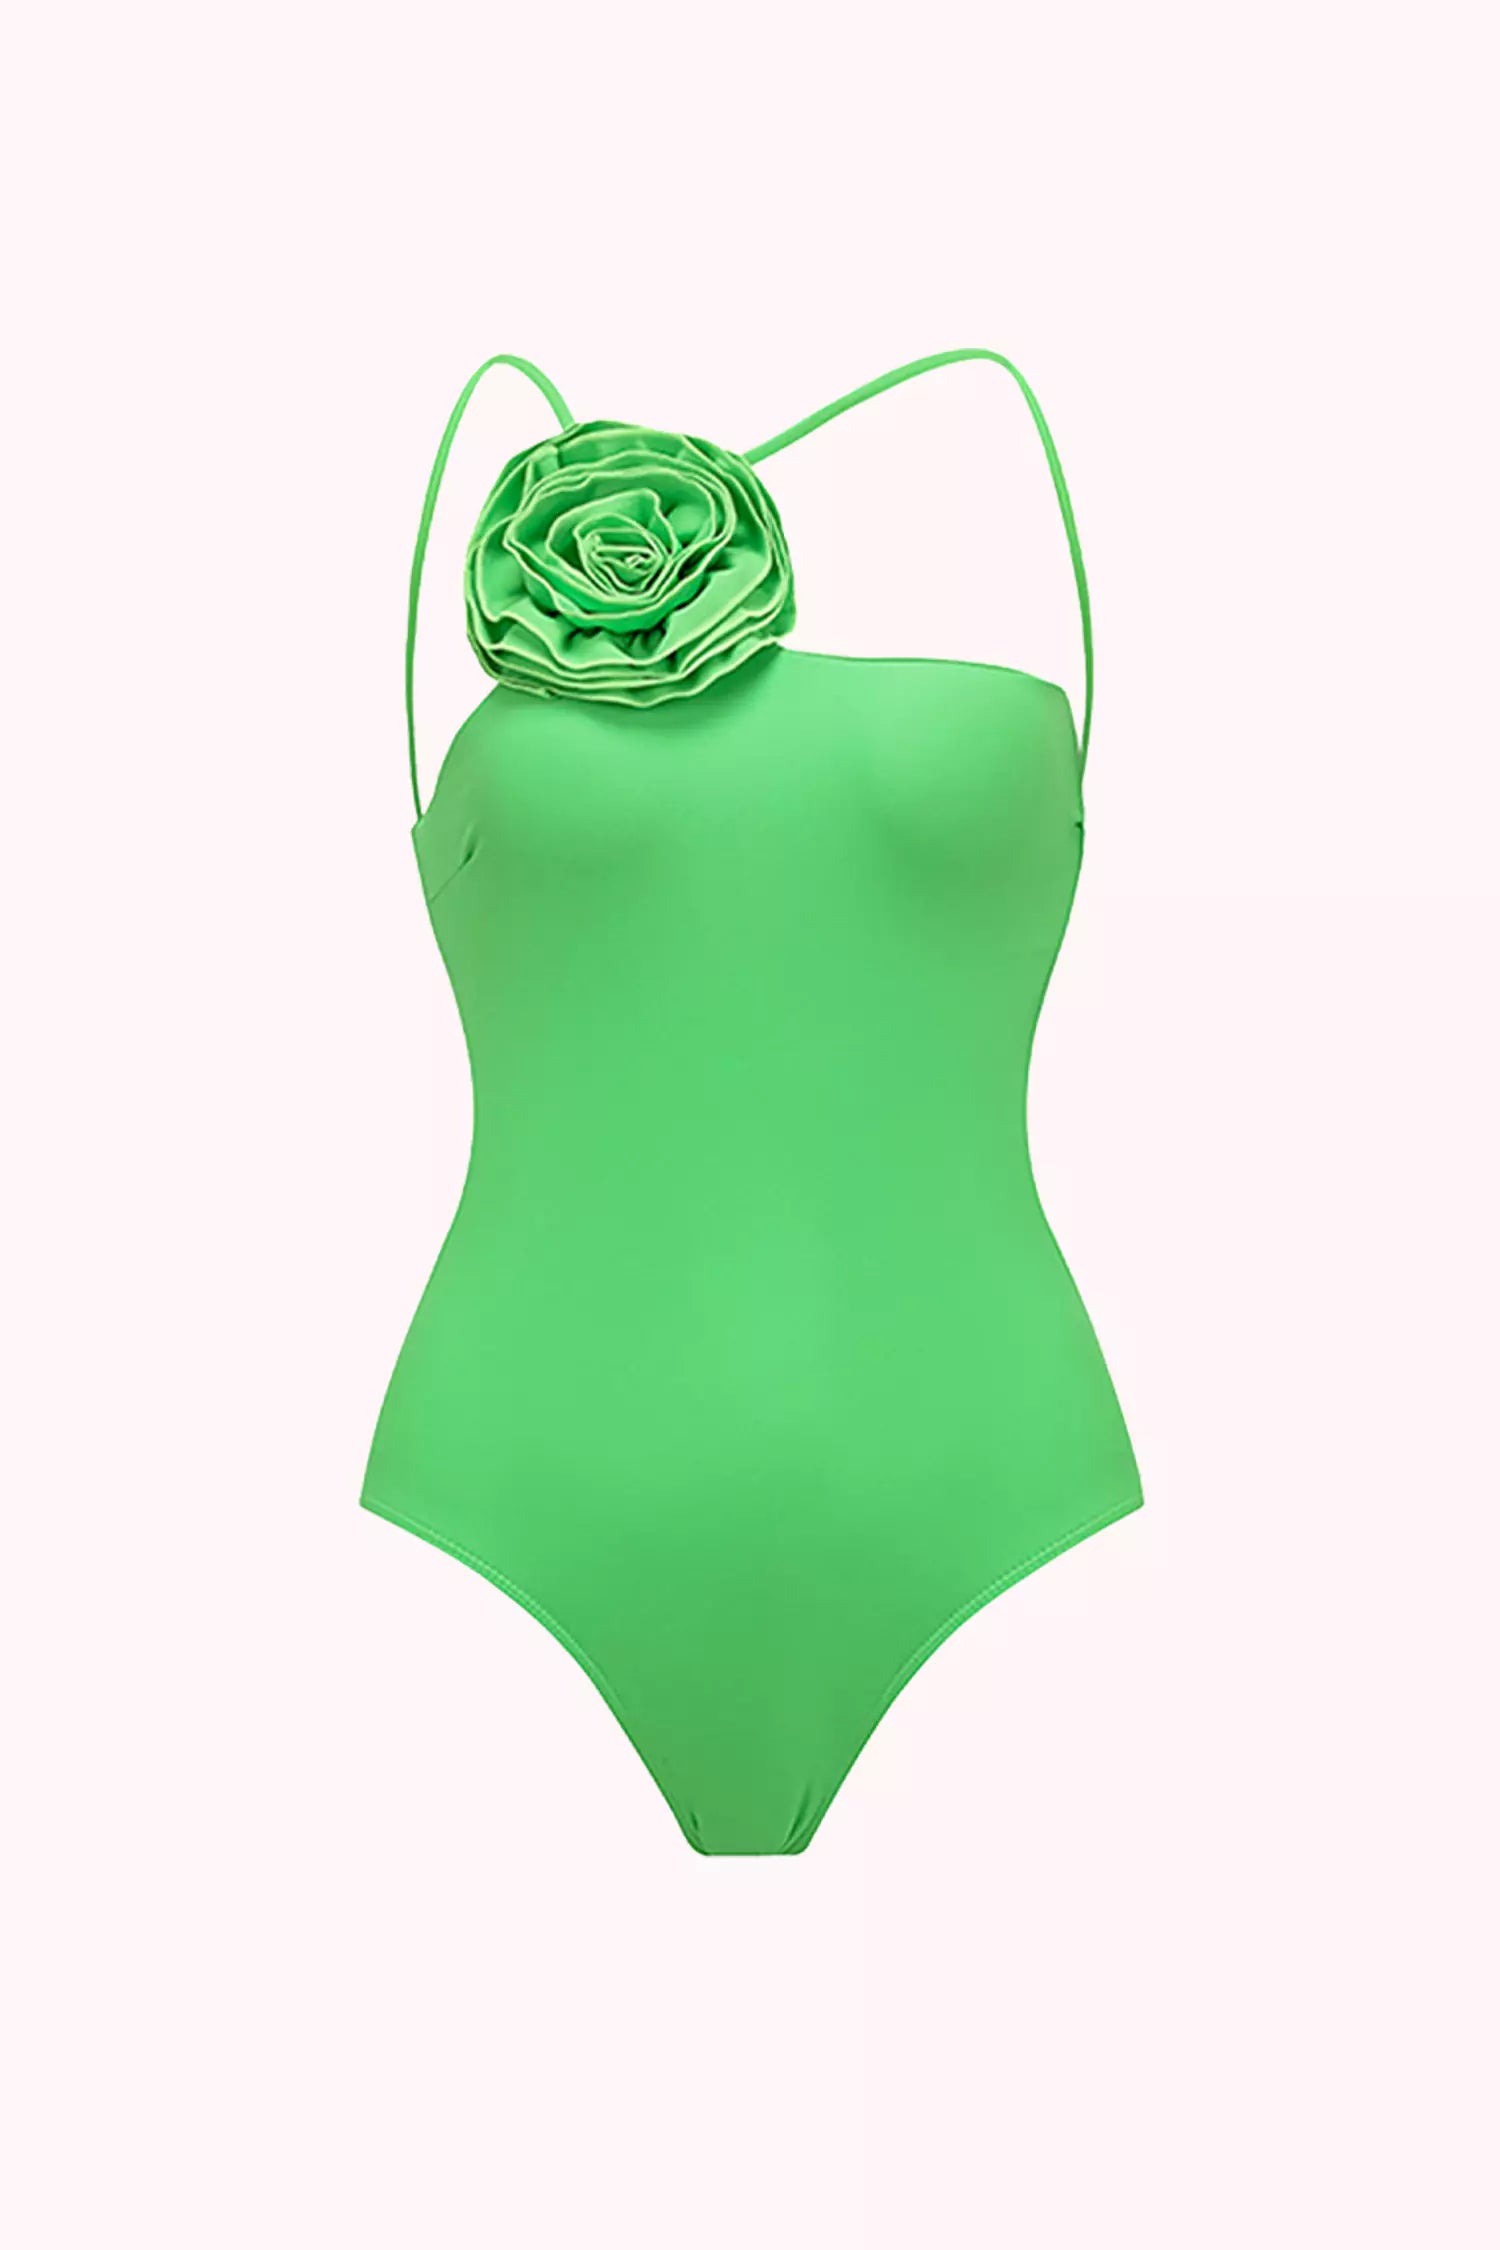 One Shoulder Swimsuit , Green One Piece Swimsuit, Bathing Suit for